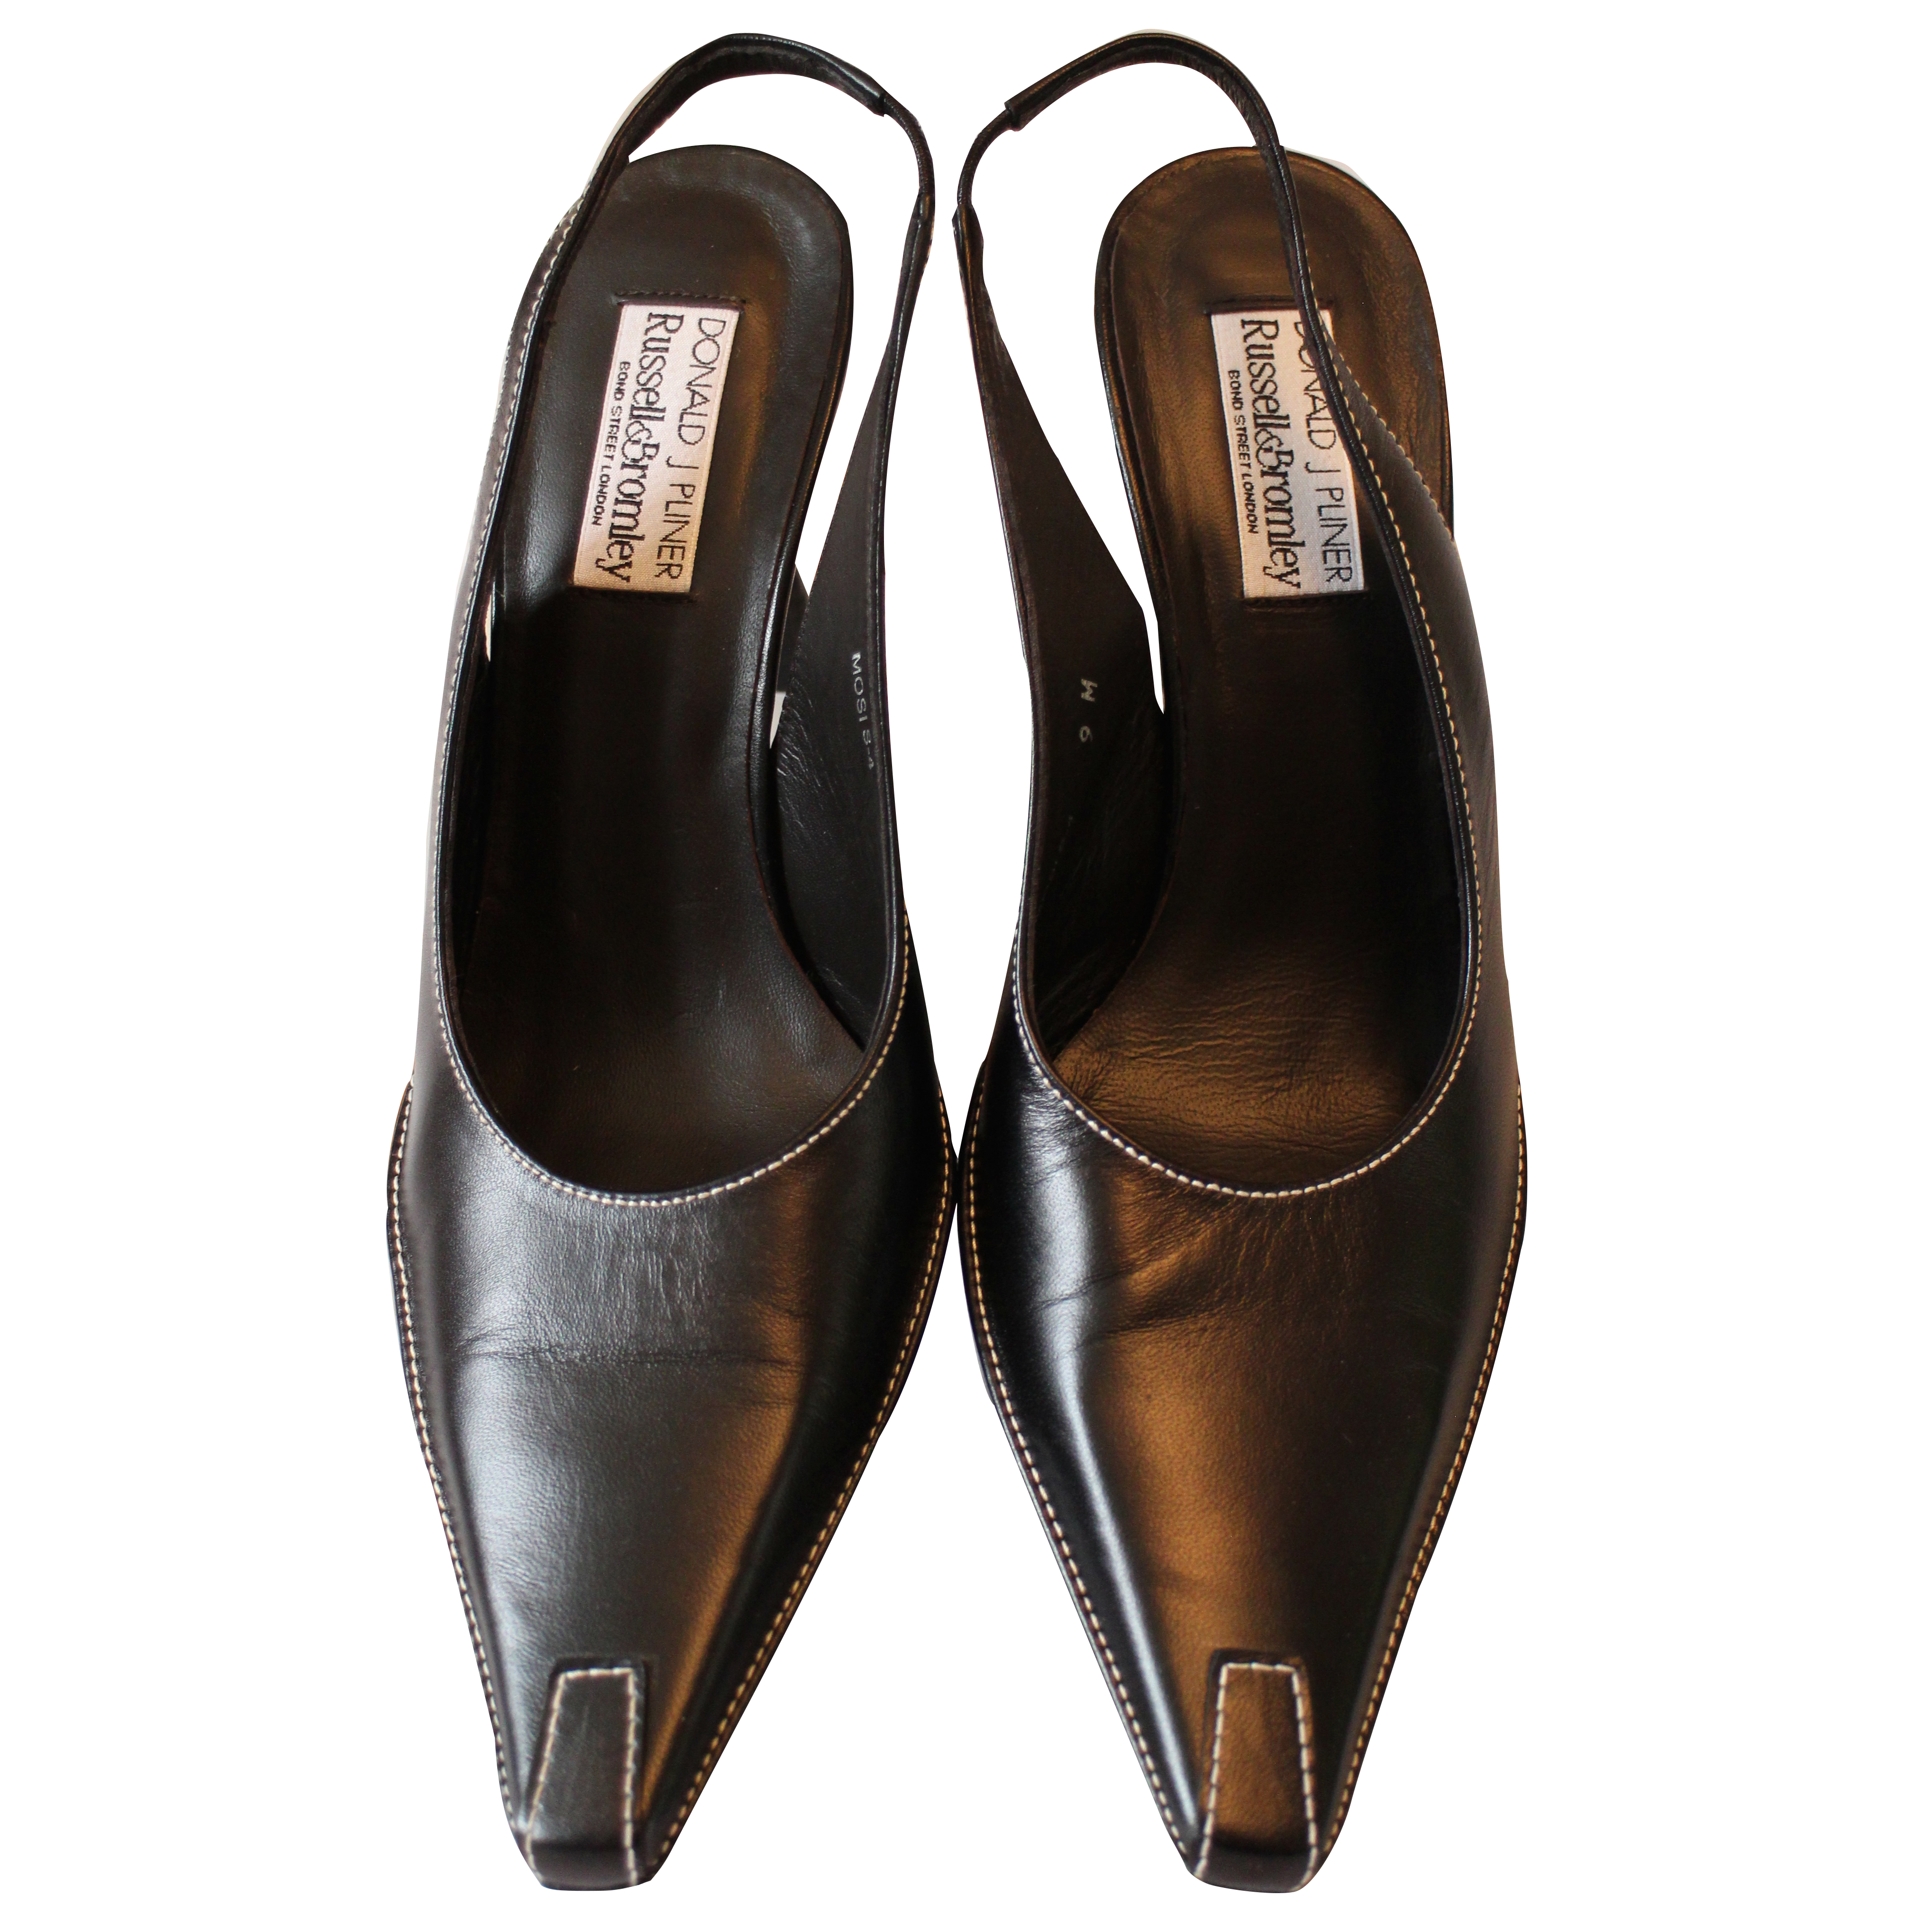 Russell Bromley Donald J Pliner | HEWI